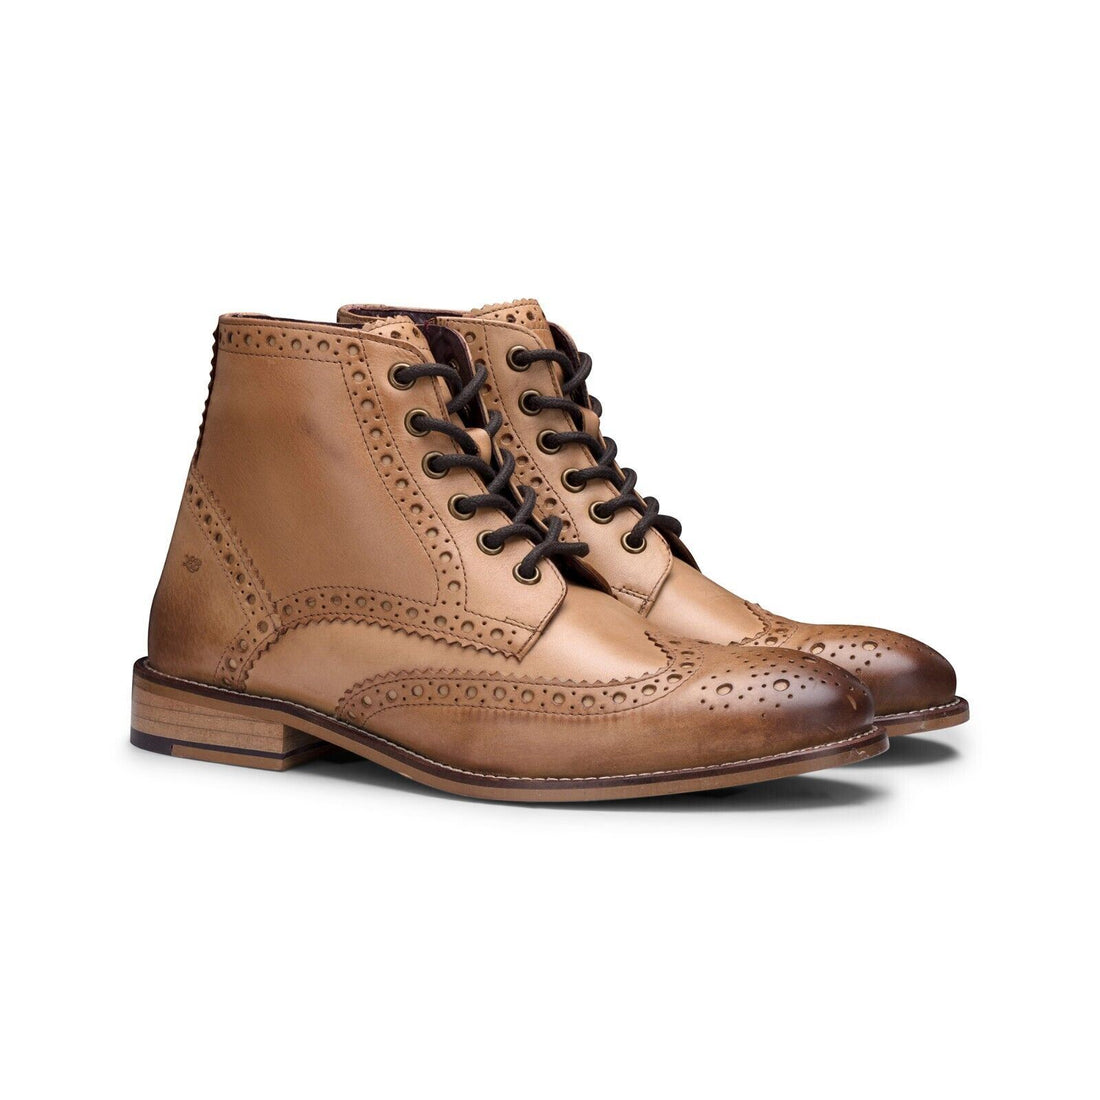 Mens Classic Oxford Tan Leather Gatsby Brogue Ankle Boots - Upperclass Fashions 